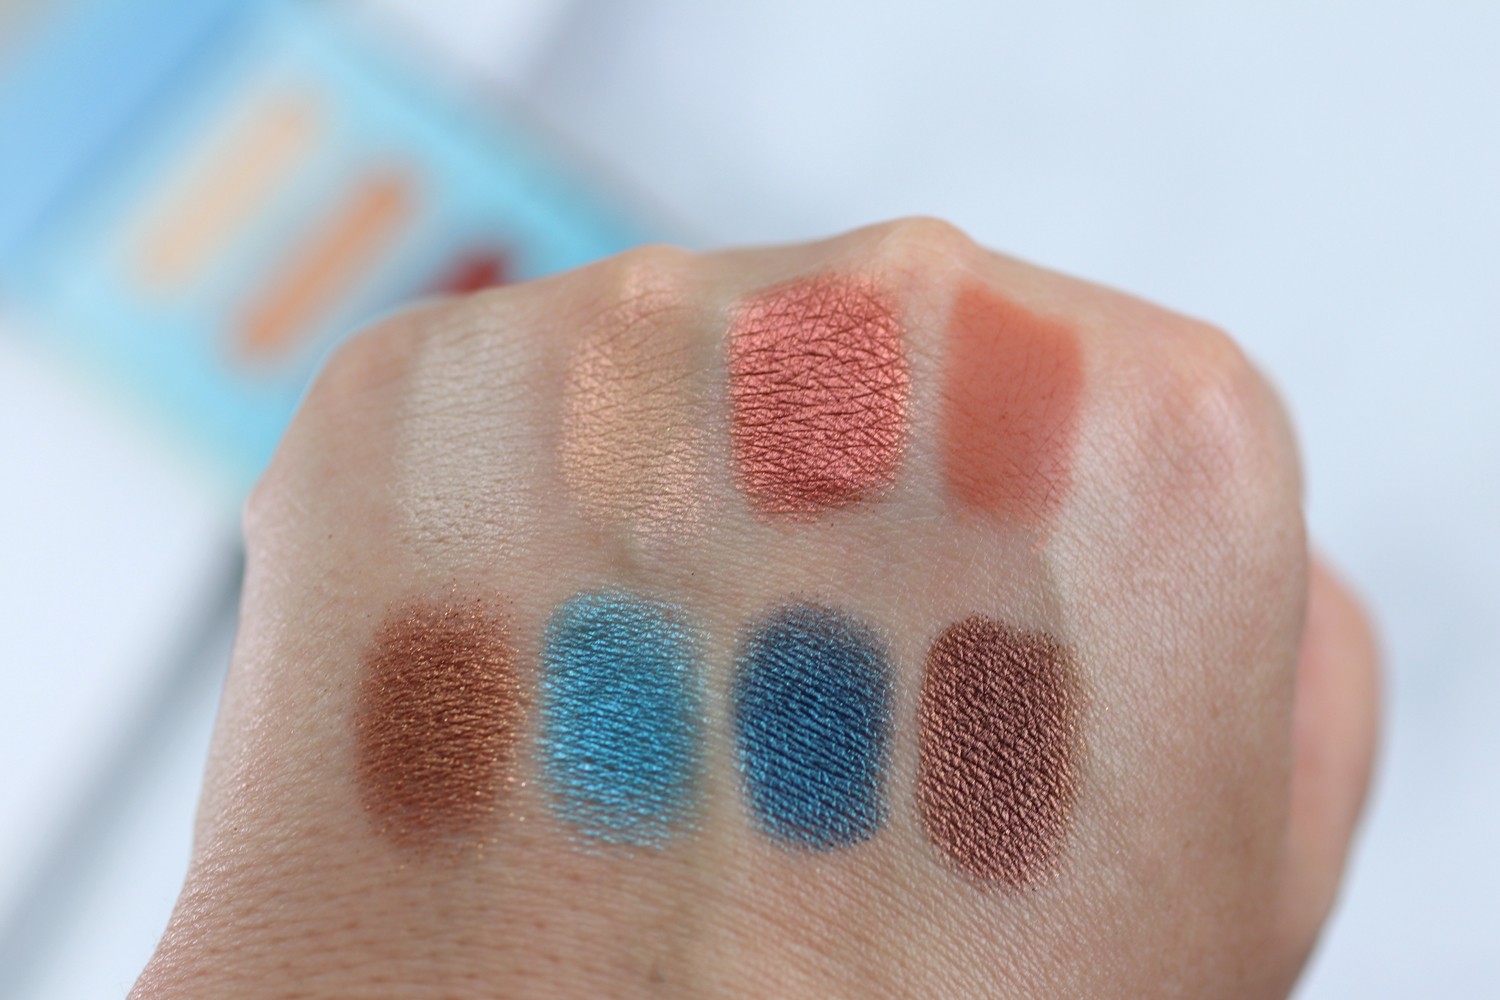 Urban Decay Beached Eyeshadow Palette Review and Swatches - Which Metallic Lipsticks Do You Like featured by popular Los Angeles cruelty free beauty blogger My Beauty Bunny